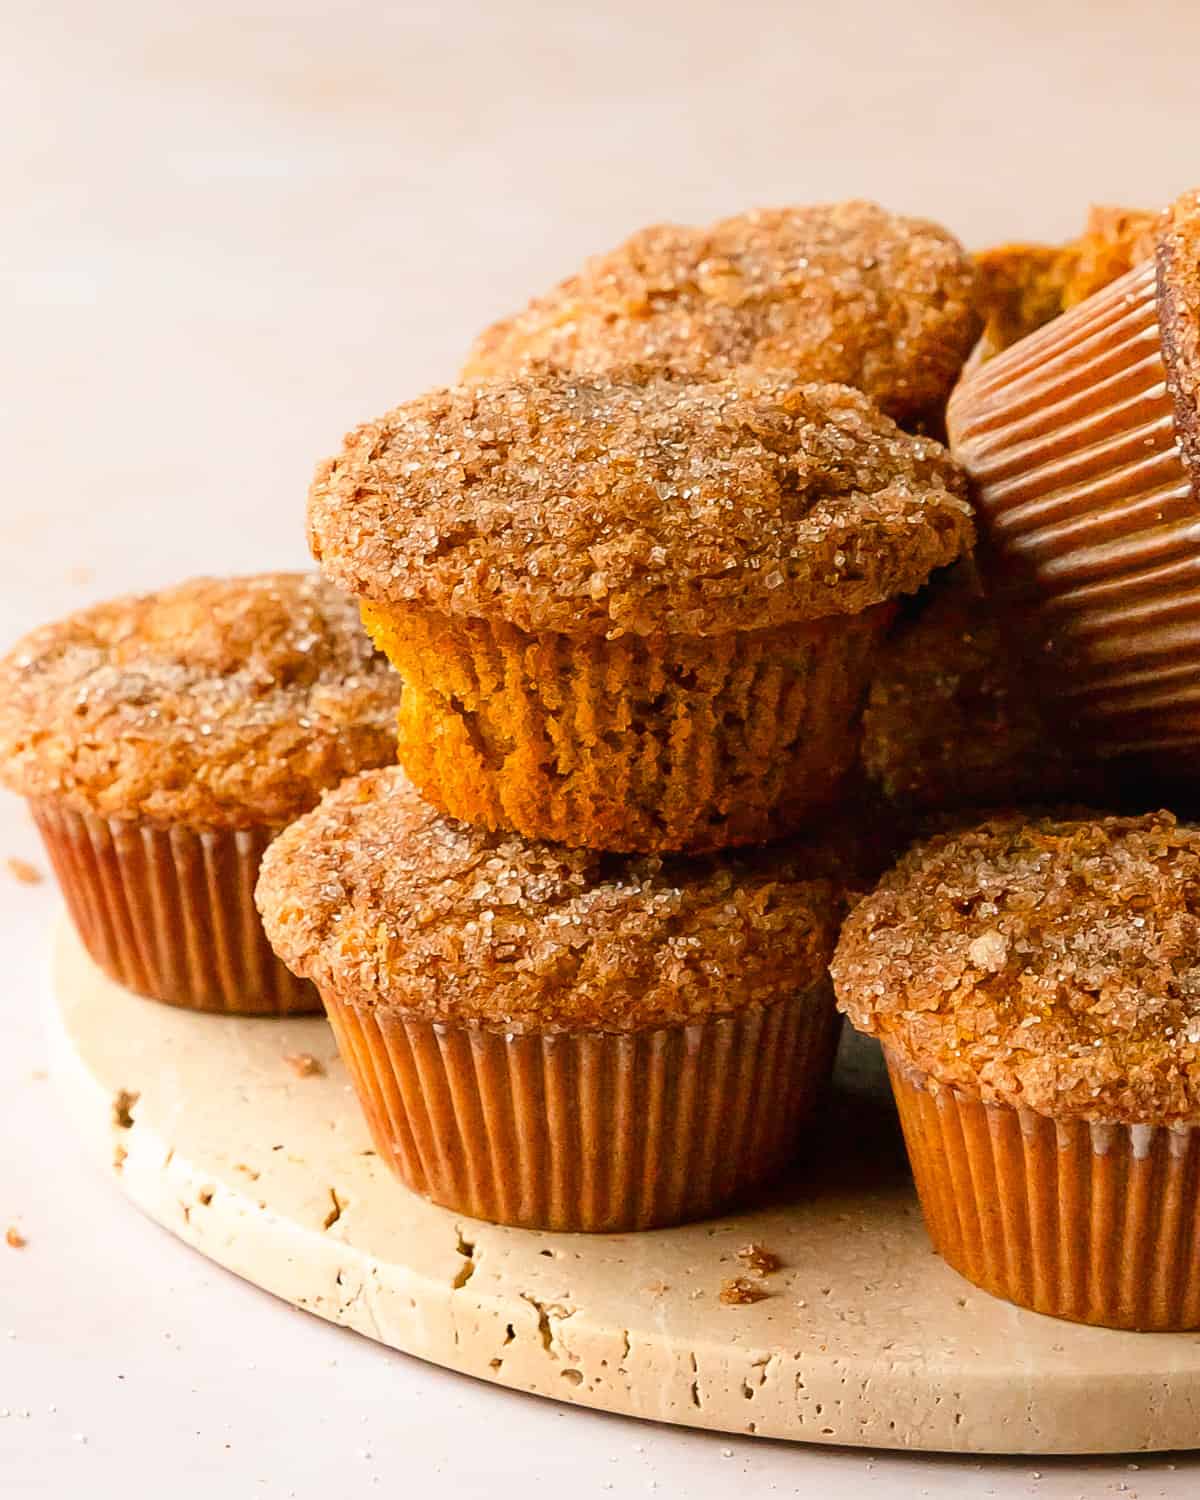 Pumpkin banana muffins are a deliciously soft, moist and fluffy cross between pumpkin bread and banana bread. These banana pumpkin muffins are topped with crunchy cinnamon sugar, giving them the perfect contrast of texture and flavors.  They make the perfect fall breakfast treat. 